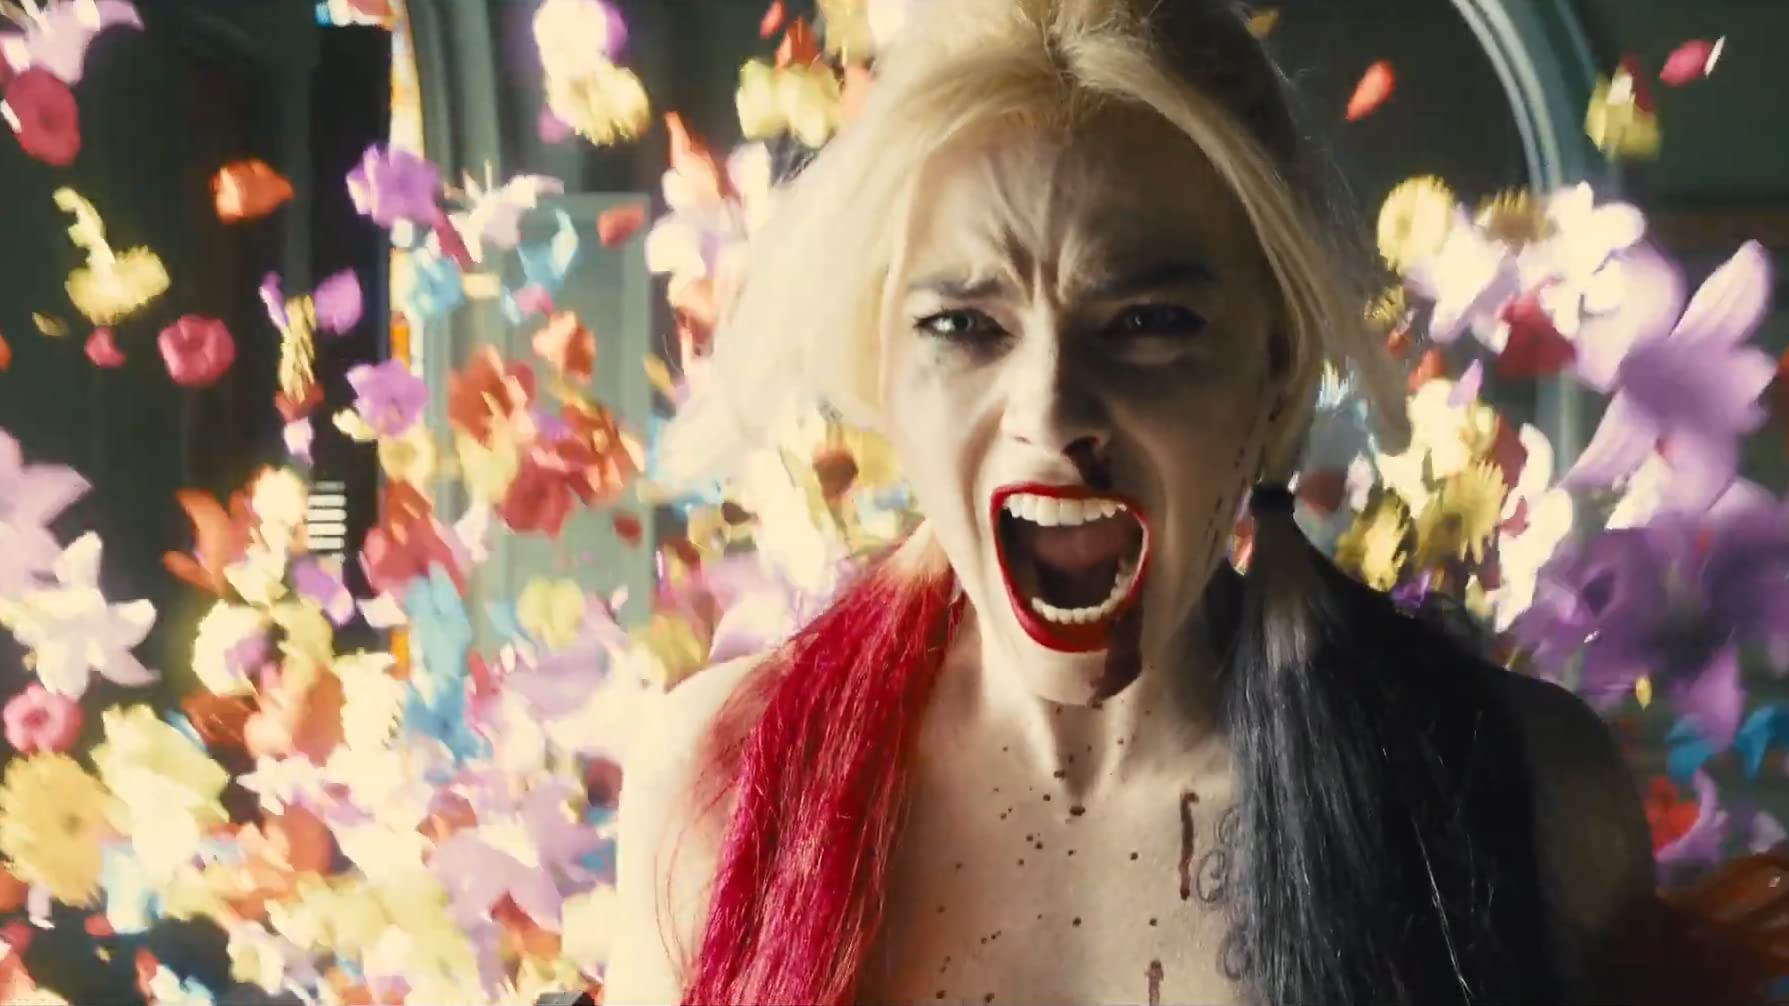 The Suicide Squad' review: Redemption for James Gunn and DC - The